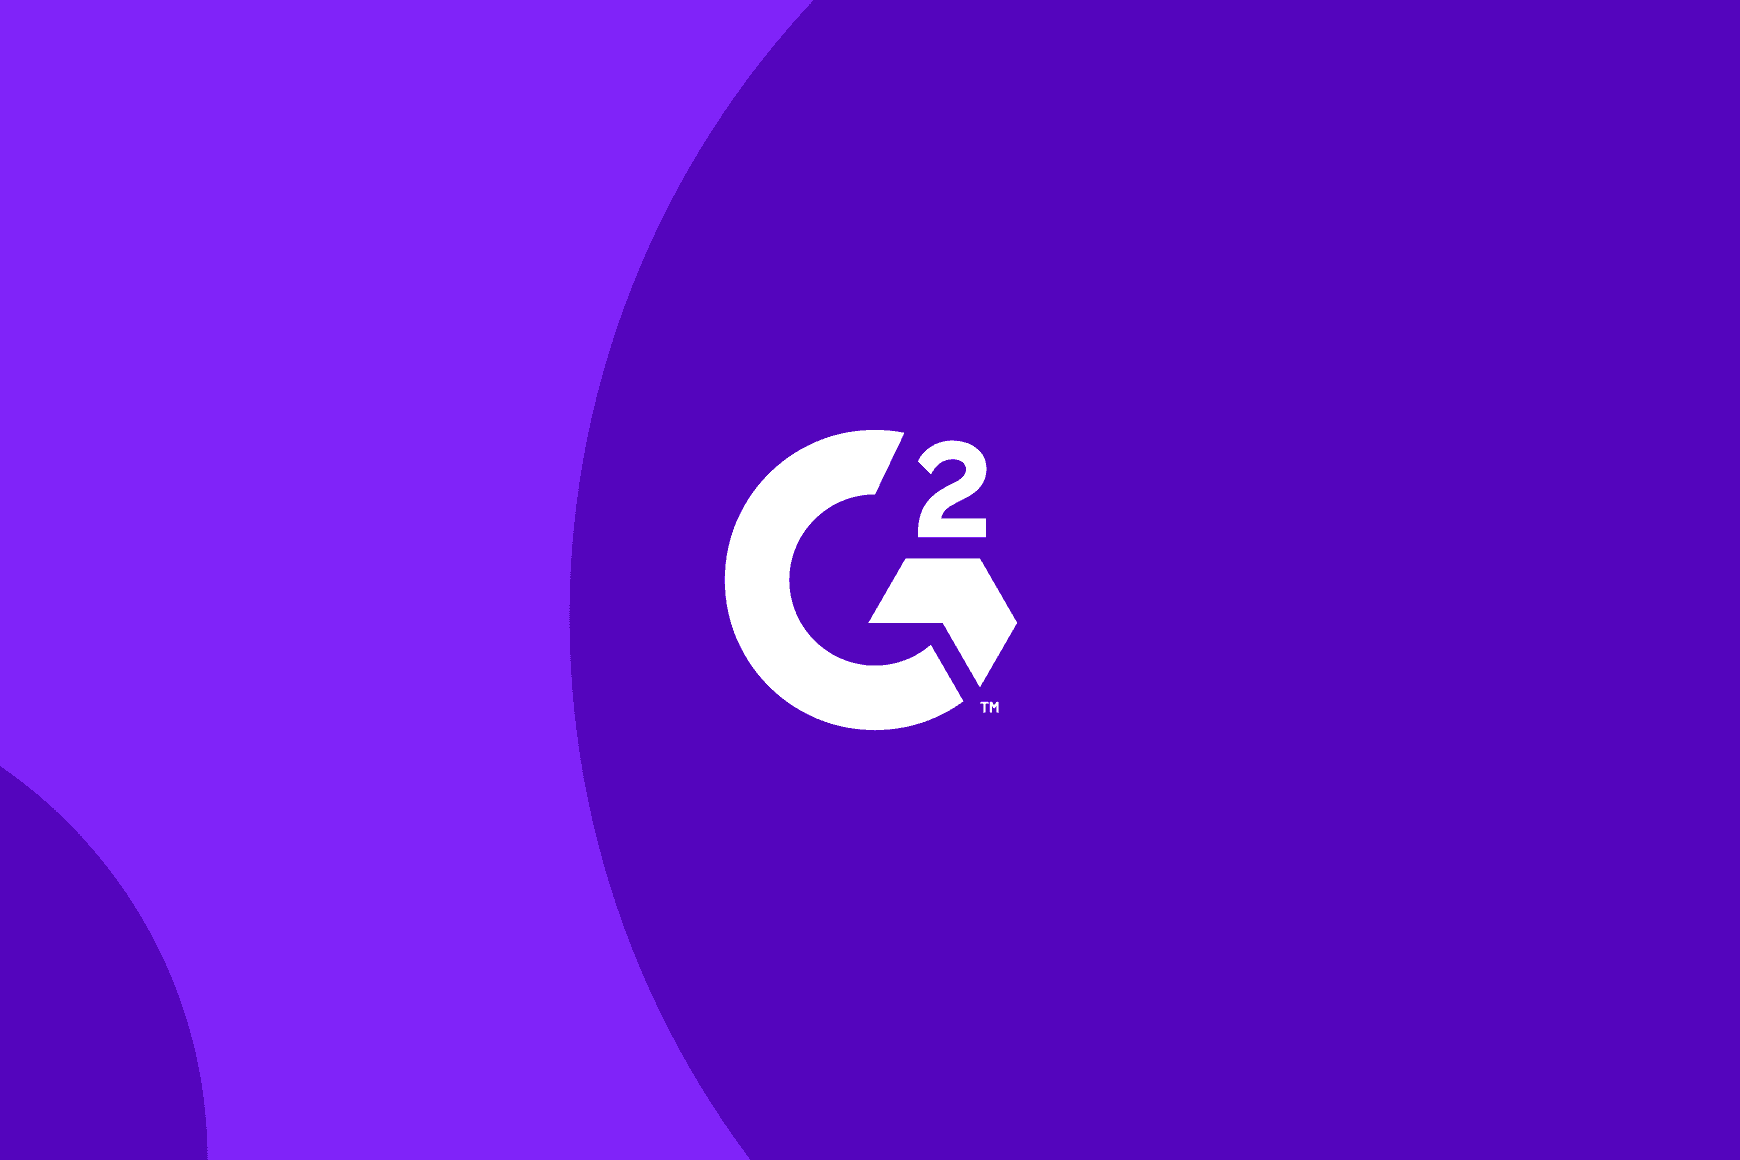 Talkdesk again leads G2 Spring 2021 with highest G2 Scores, more reports than any other CCaaS provider.